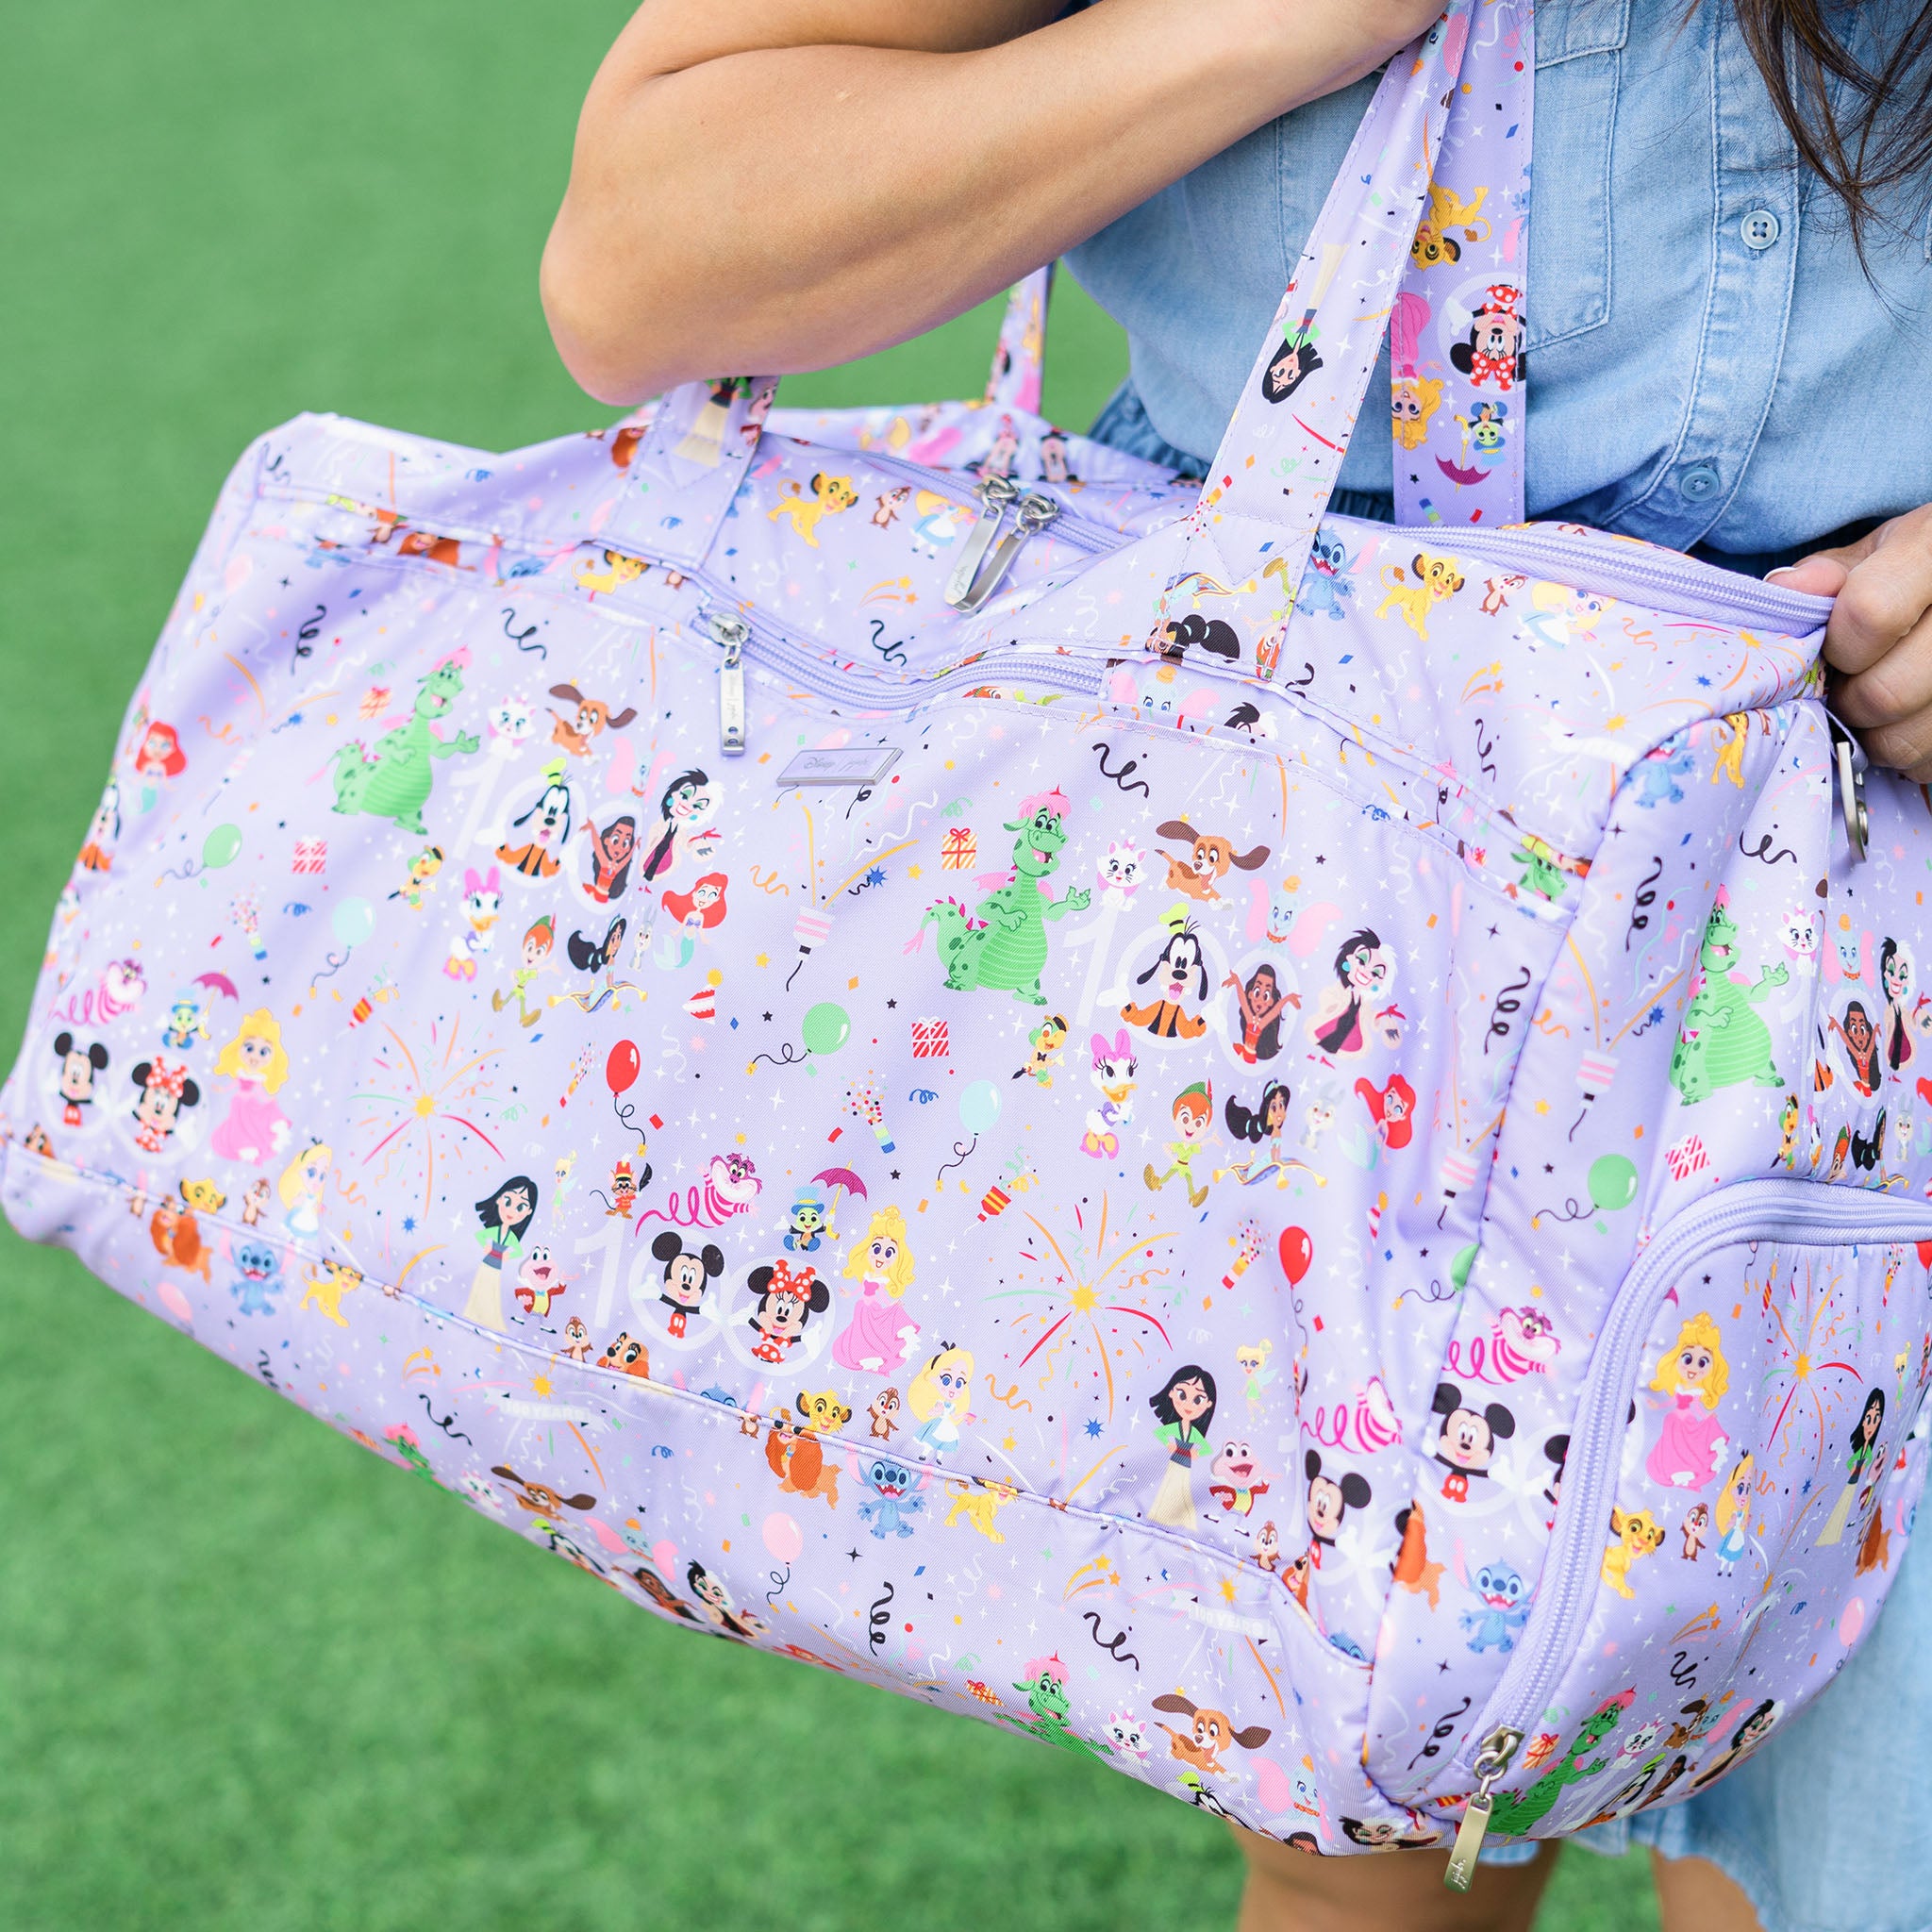 A purple duffel bag with a D100 Disney's Century of Magic print, showcasing beloved Disney characters from the past century. The design pays homage to Disney's rich history, encompassing a variety of iconic characters that have captured the hearts of audiences over the last 100 years.